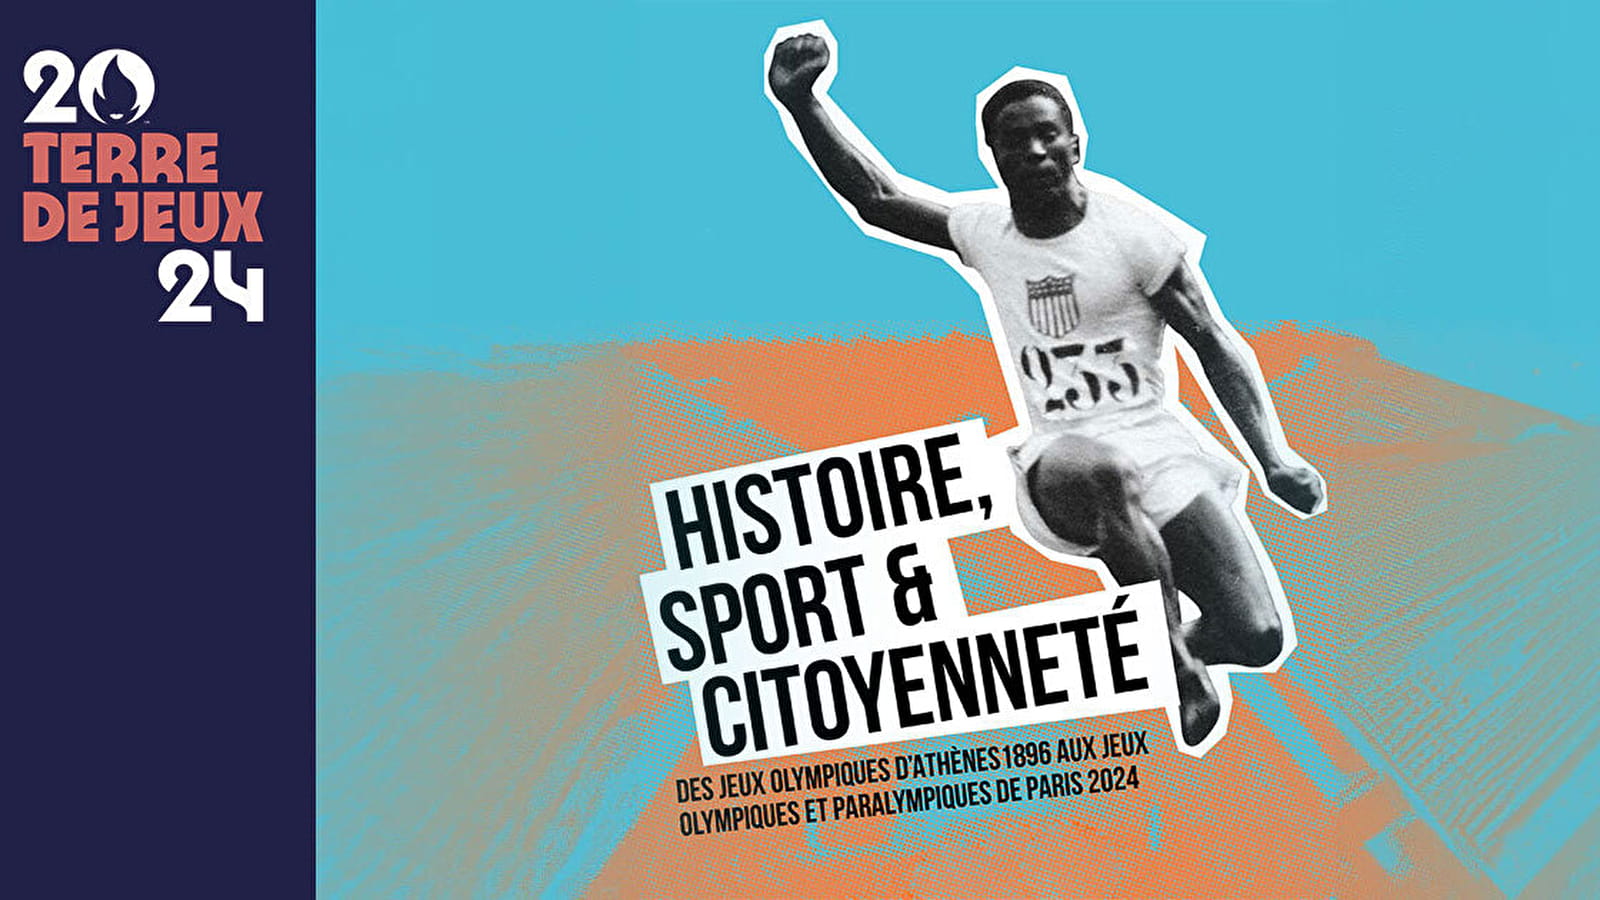 History, sport and citizenship